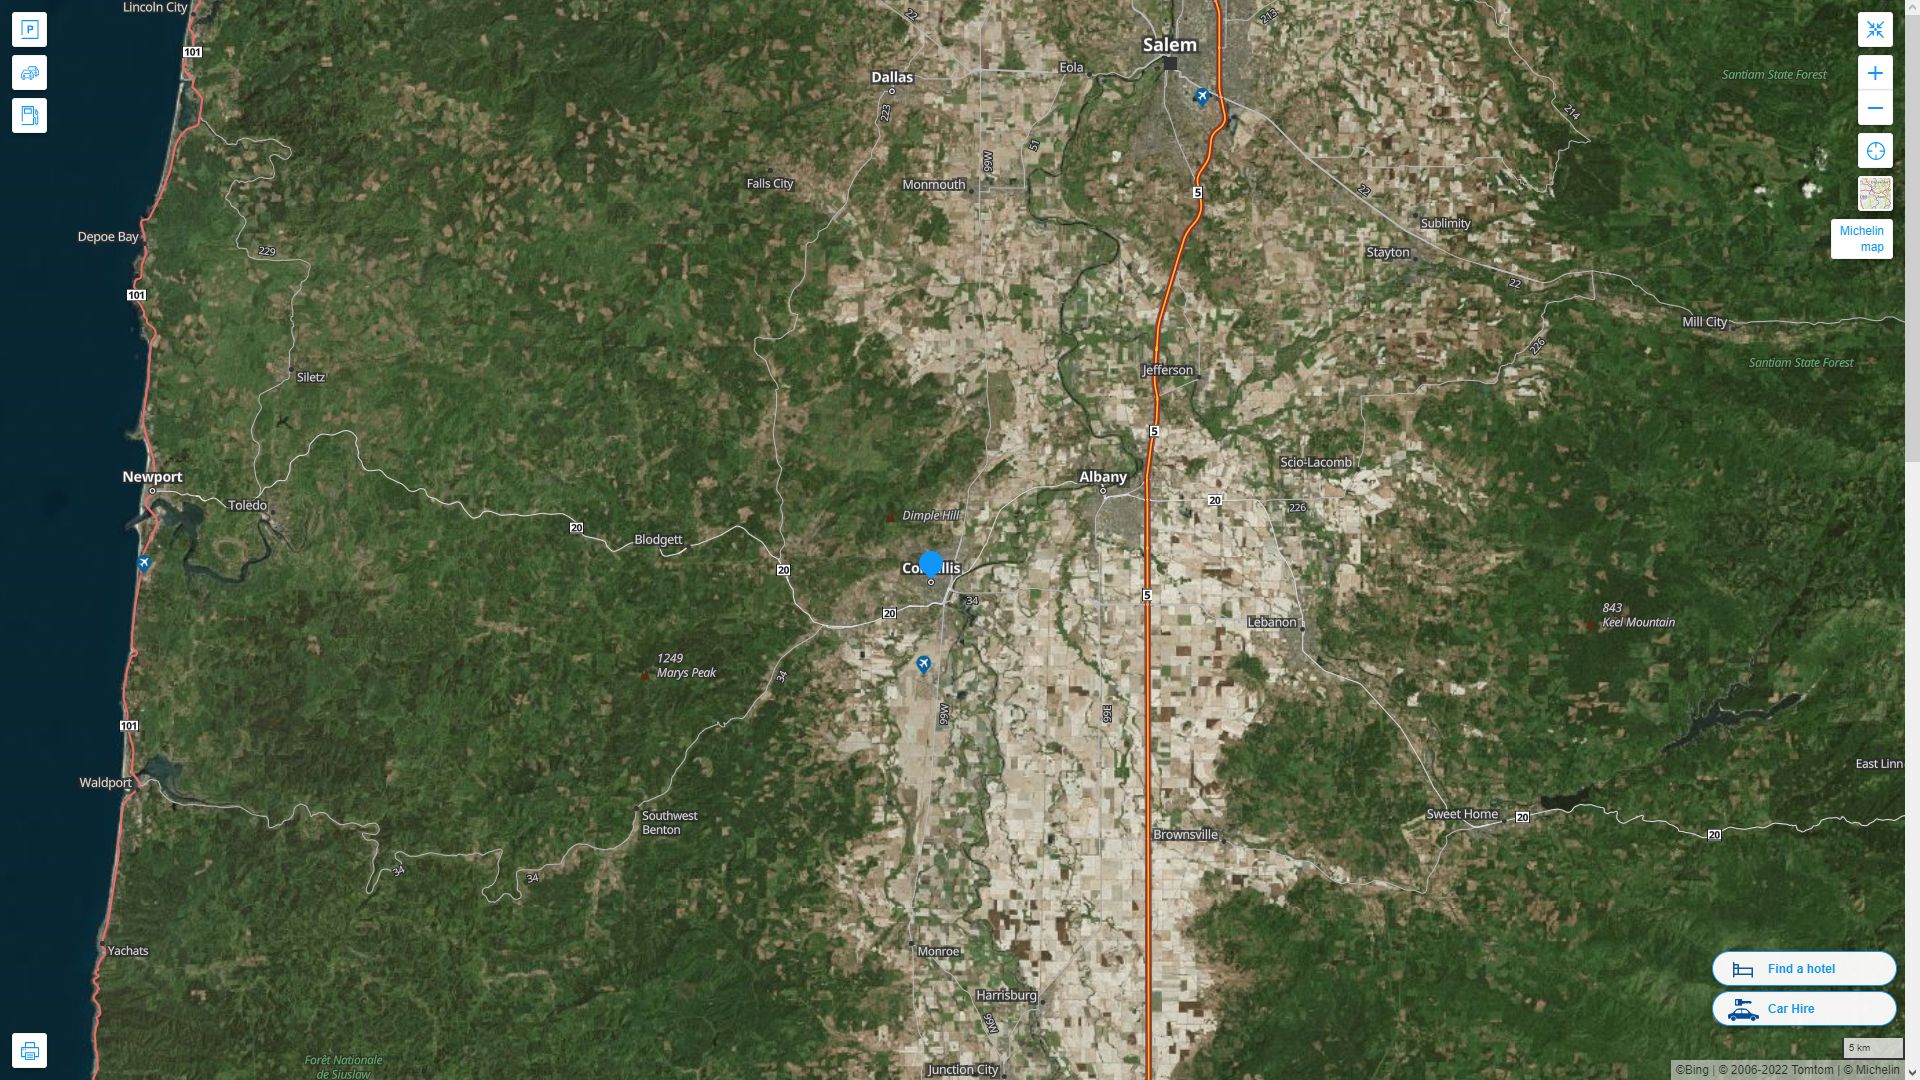 Corvallis Oregon Highway and Road Map with Satellite View